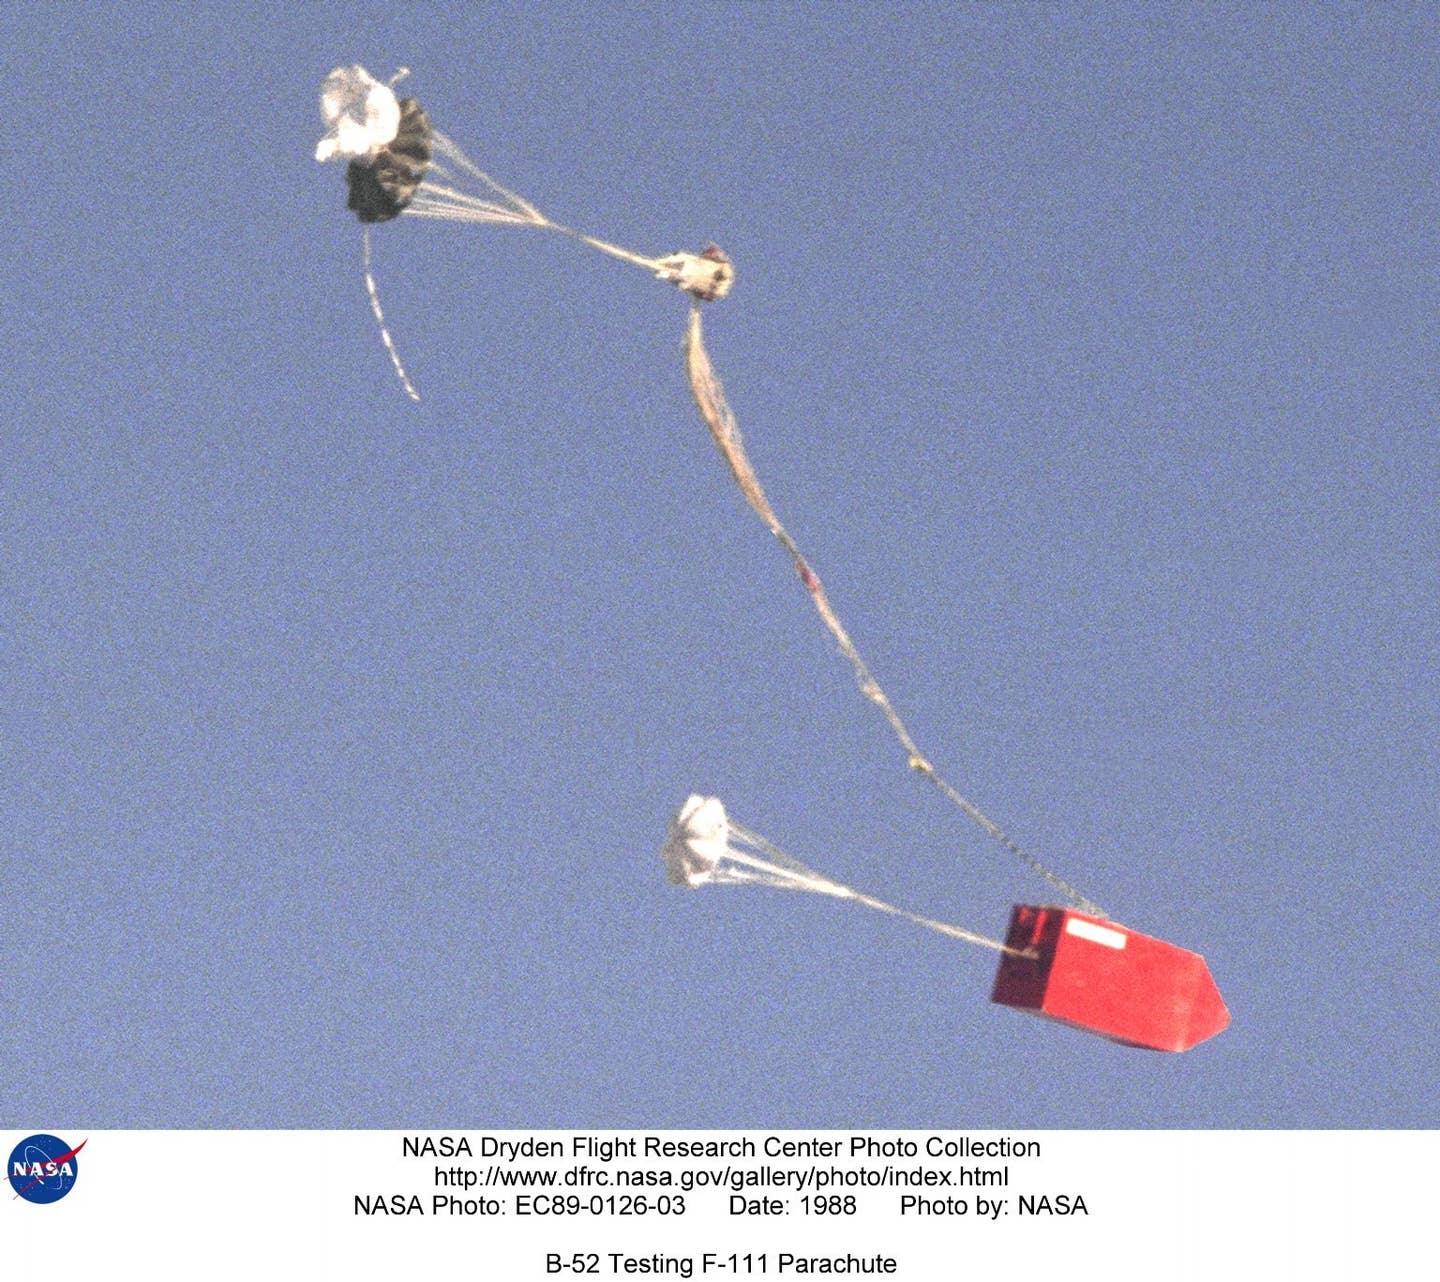 In the late 1980s, NASA used a B-52 for drop tests of a new parachute design for the F-111's escape module. (NASA)